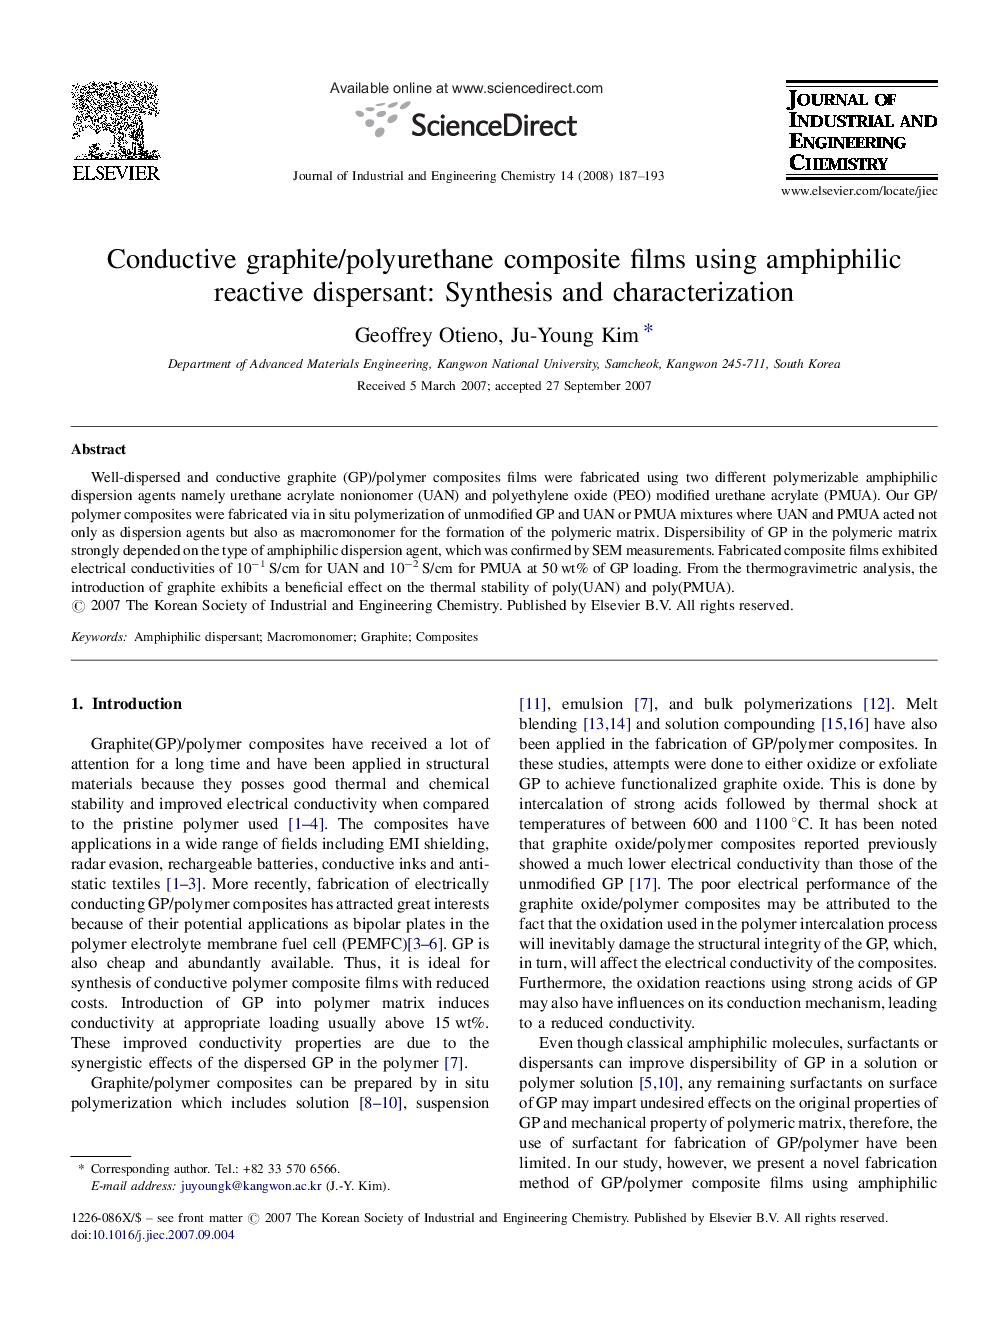 Conductive graphite/polyurethane composite films using amphiphilic reactive dispersant: Synthesis and characterization